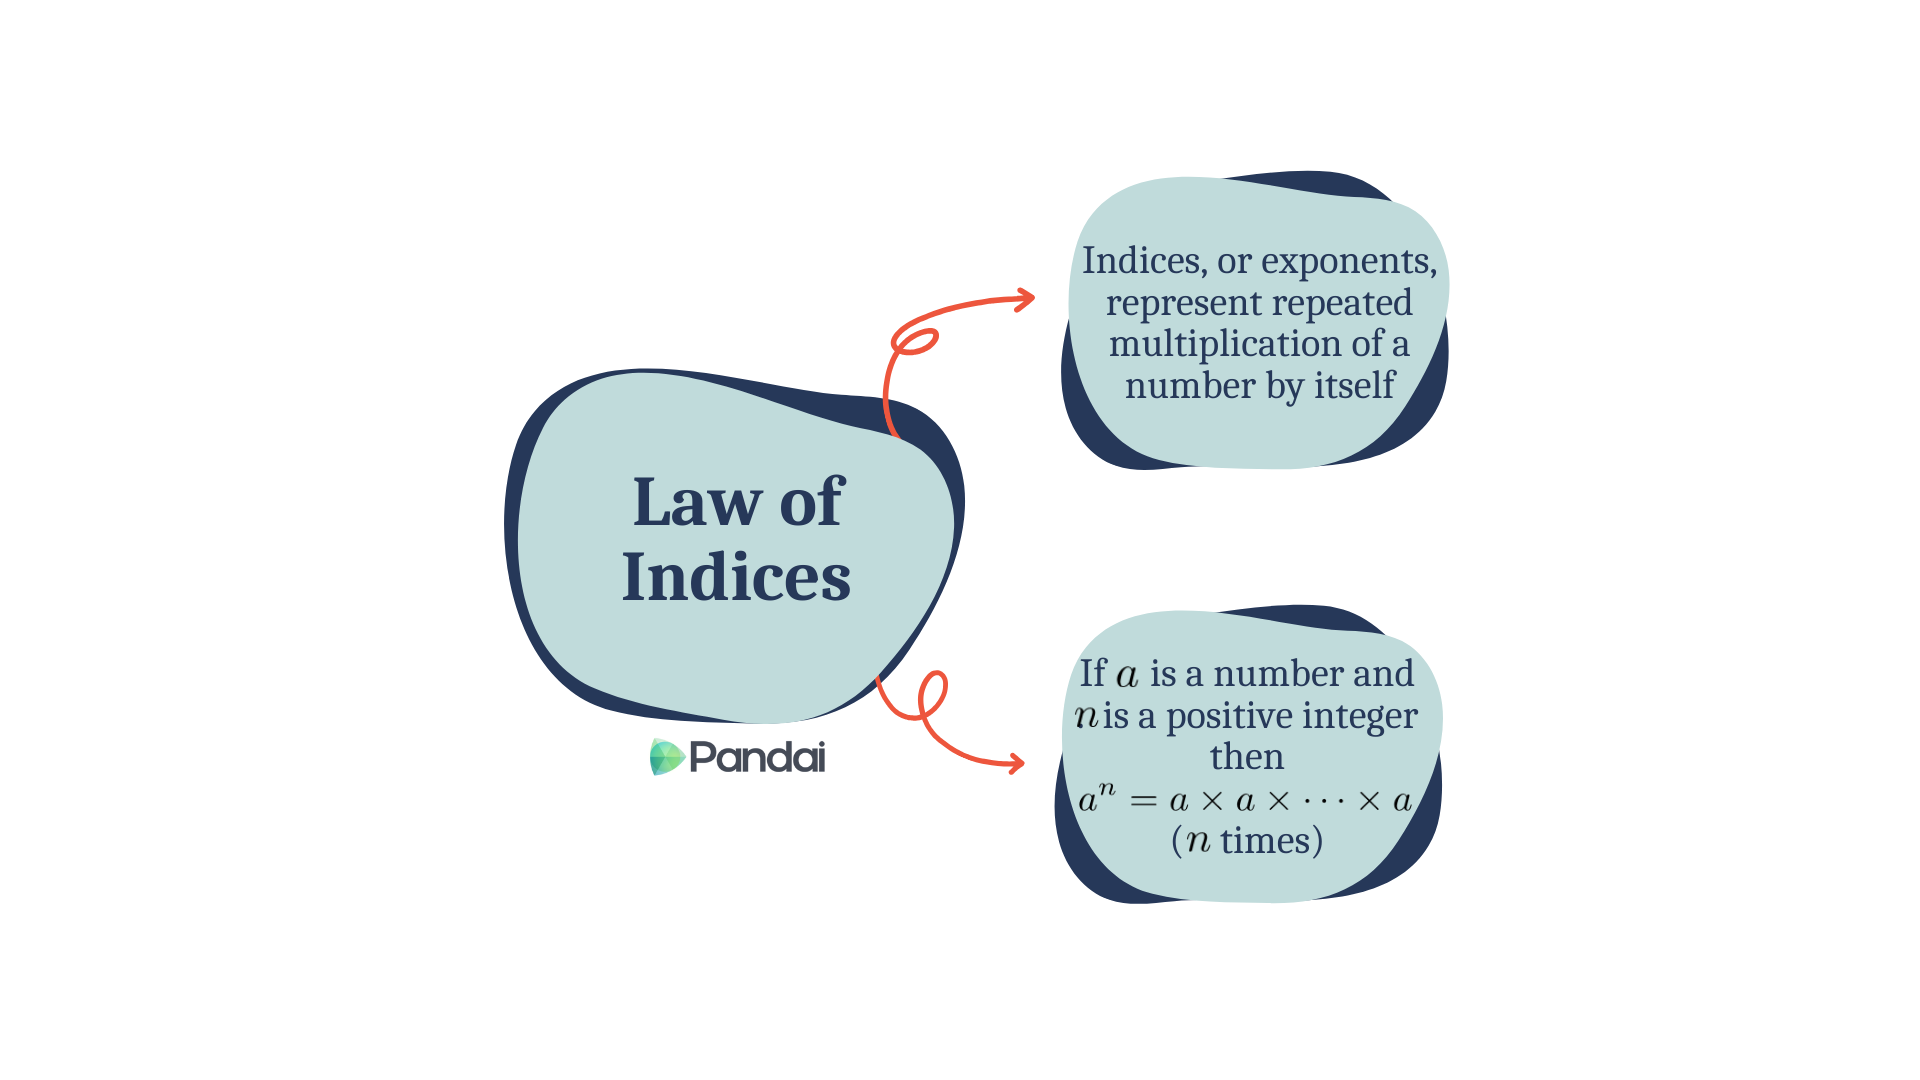 This image has a blue background and features a concept from mathematics titled ‘Law of Indices.’ The title is enclosed in a blue, irregularly shaped bubble. There are two additional bubbles connected to the title bubble with red arrows. 1. The top bubble contains the text: ‘Indices, or exponents, represent repeated multiplication of a number by itself.’ 2. The bottom bubble contains the text: ‘If a is a number and n is a positive integer, then a^n = a × a × ... × a (n times).’ In the bottom left corner, there is a logo with the text ‘Pandai.’